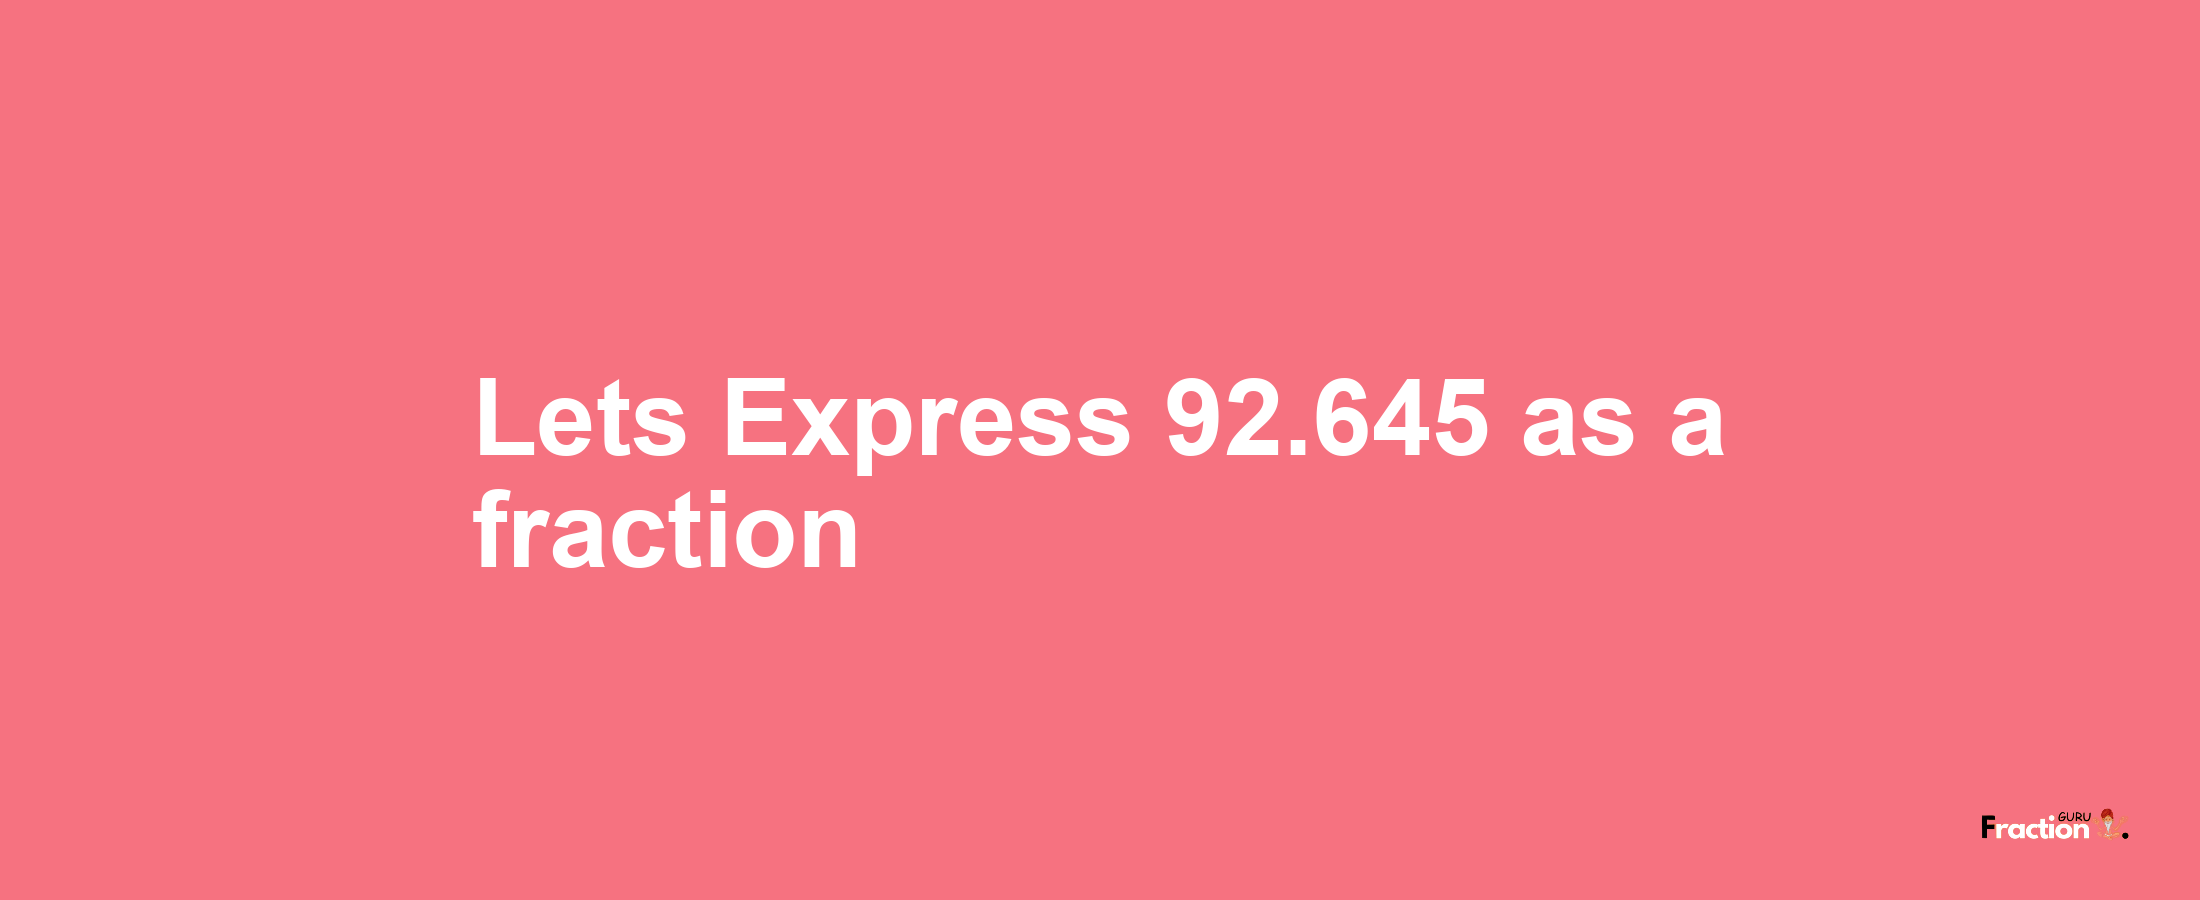 Lets Express 92.645 as afraction